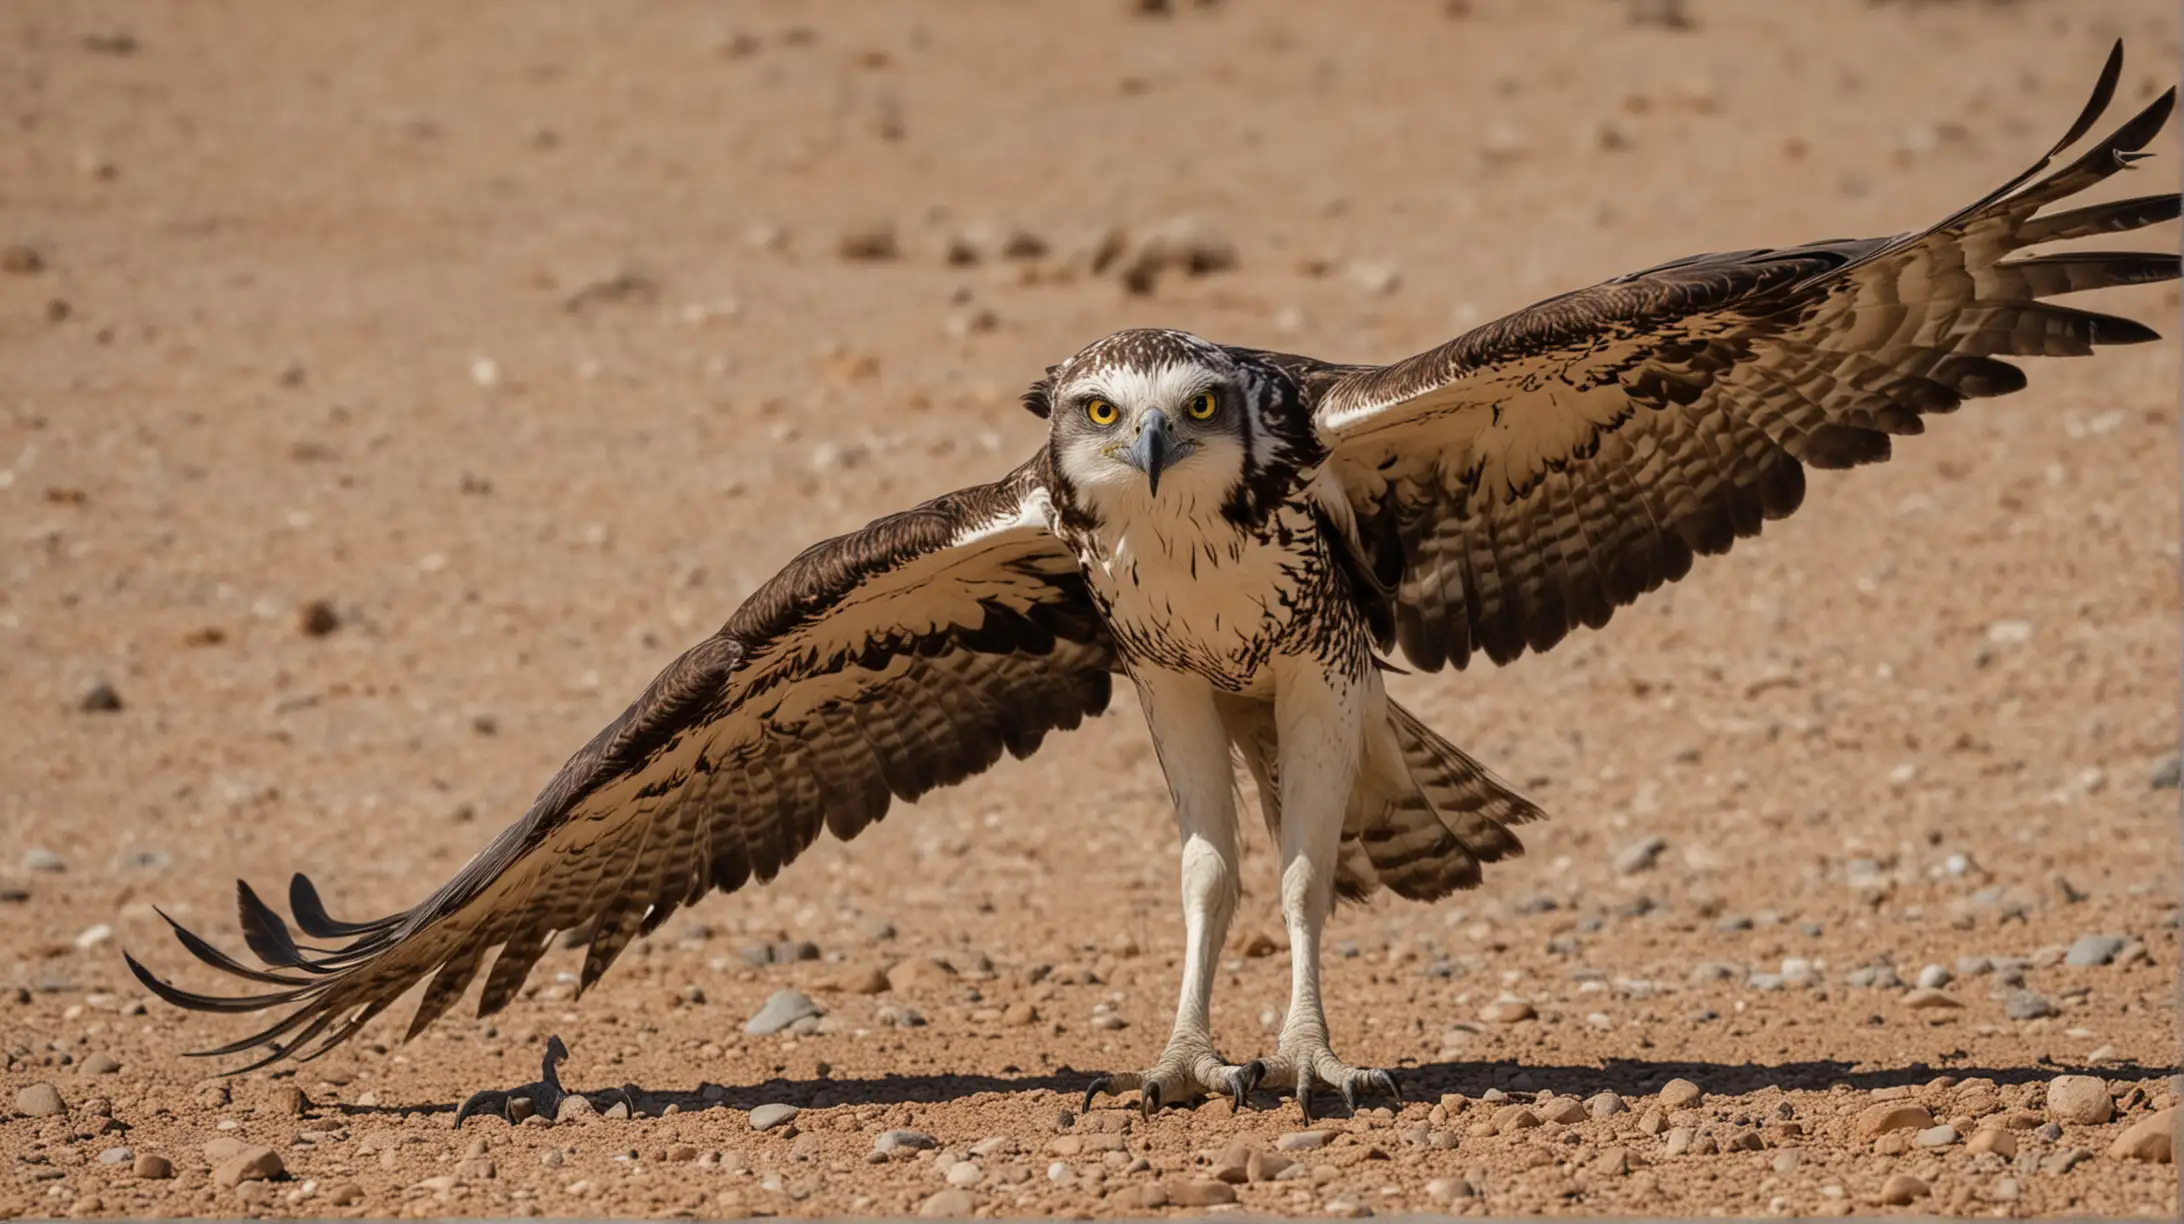 A close up of some birds of prey, such as osprey, owl, falcon, vulture in the desert location